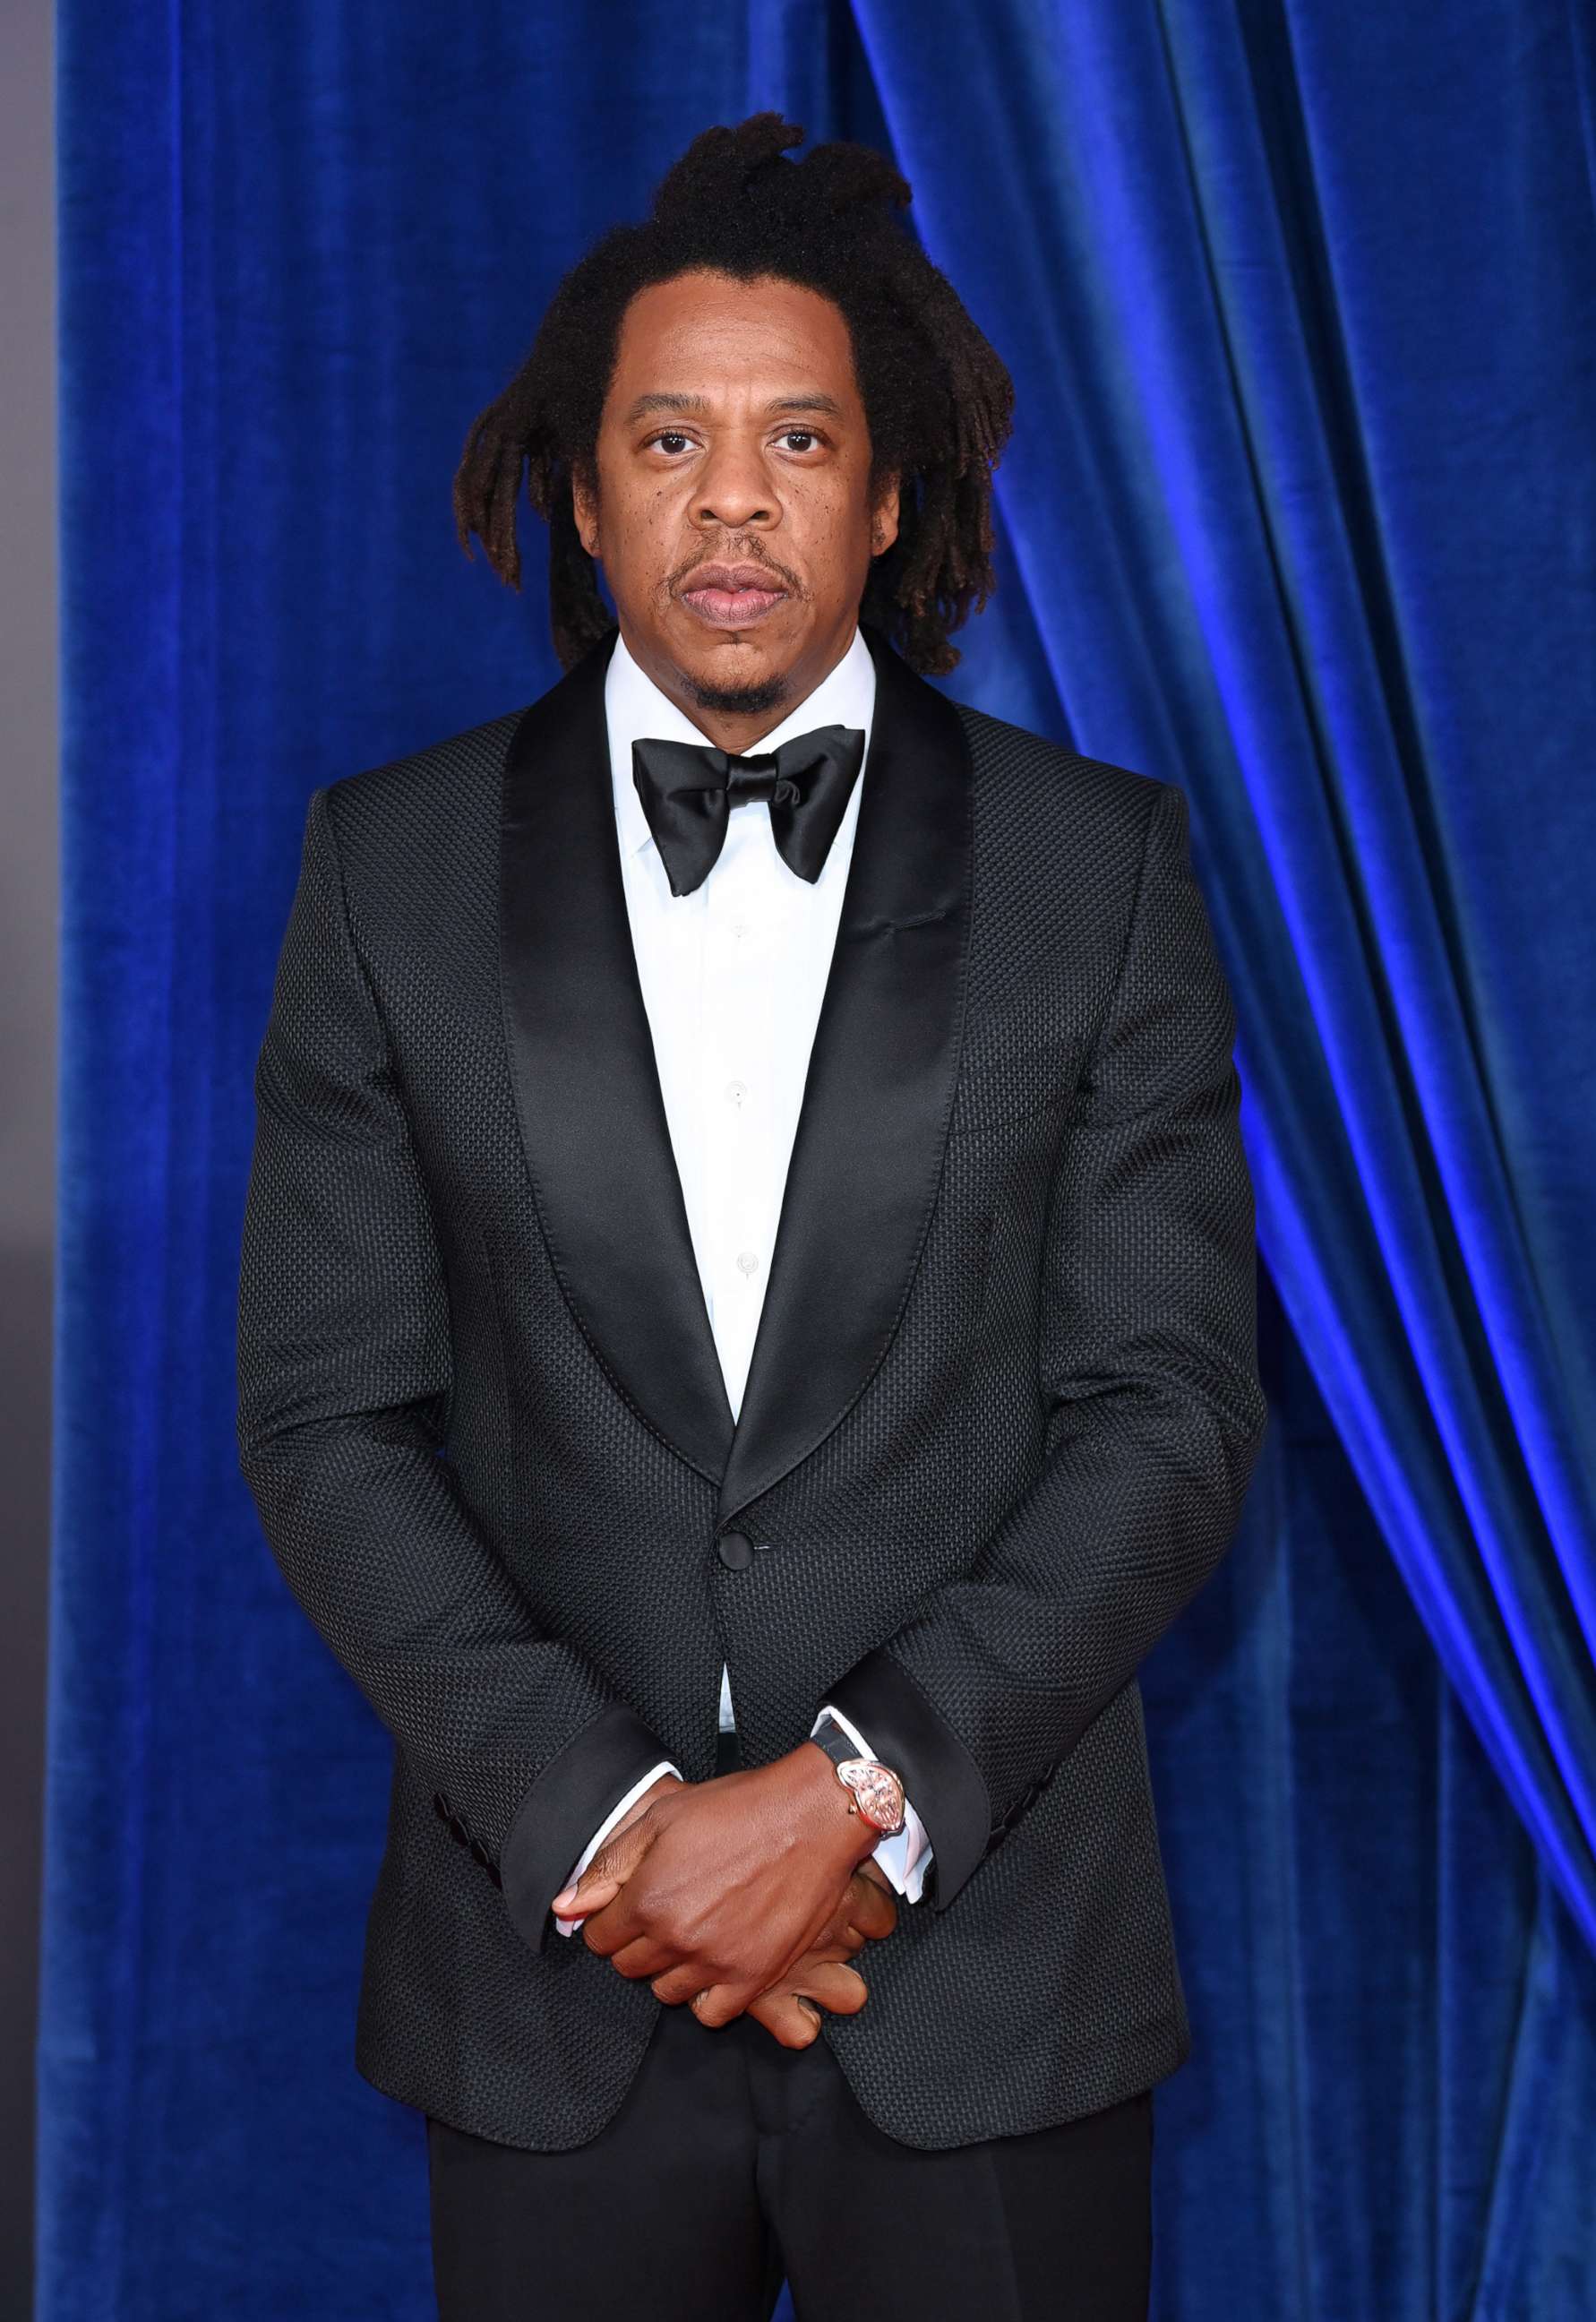 PHOTO: In this Oct. 6, 2021, file photo, Shawn Carter AKA Jay-Z attends an event in London.